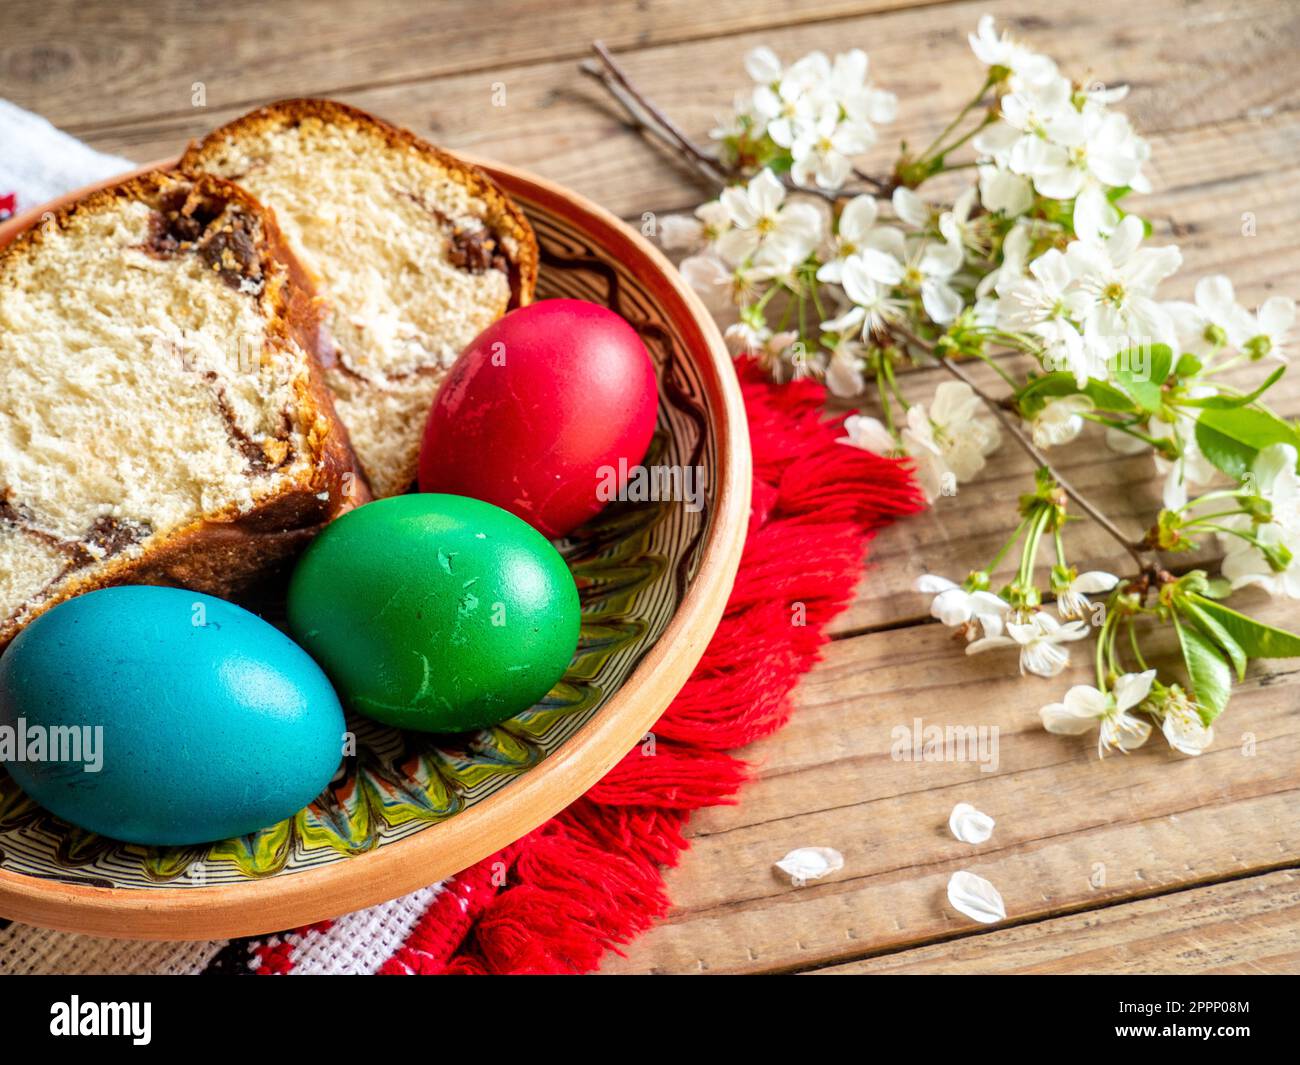 red Easter eggs next to flowering branches and plate with sweet sponge cake or cozonac on wooden table Stock Photo